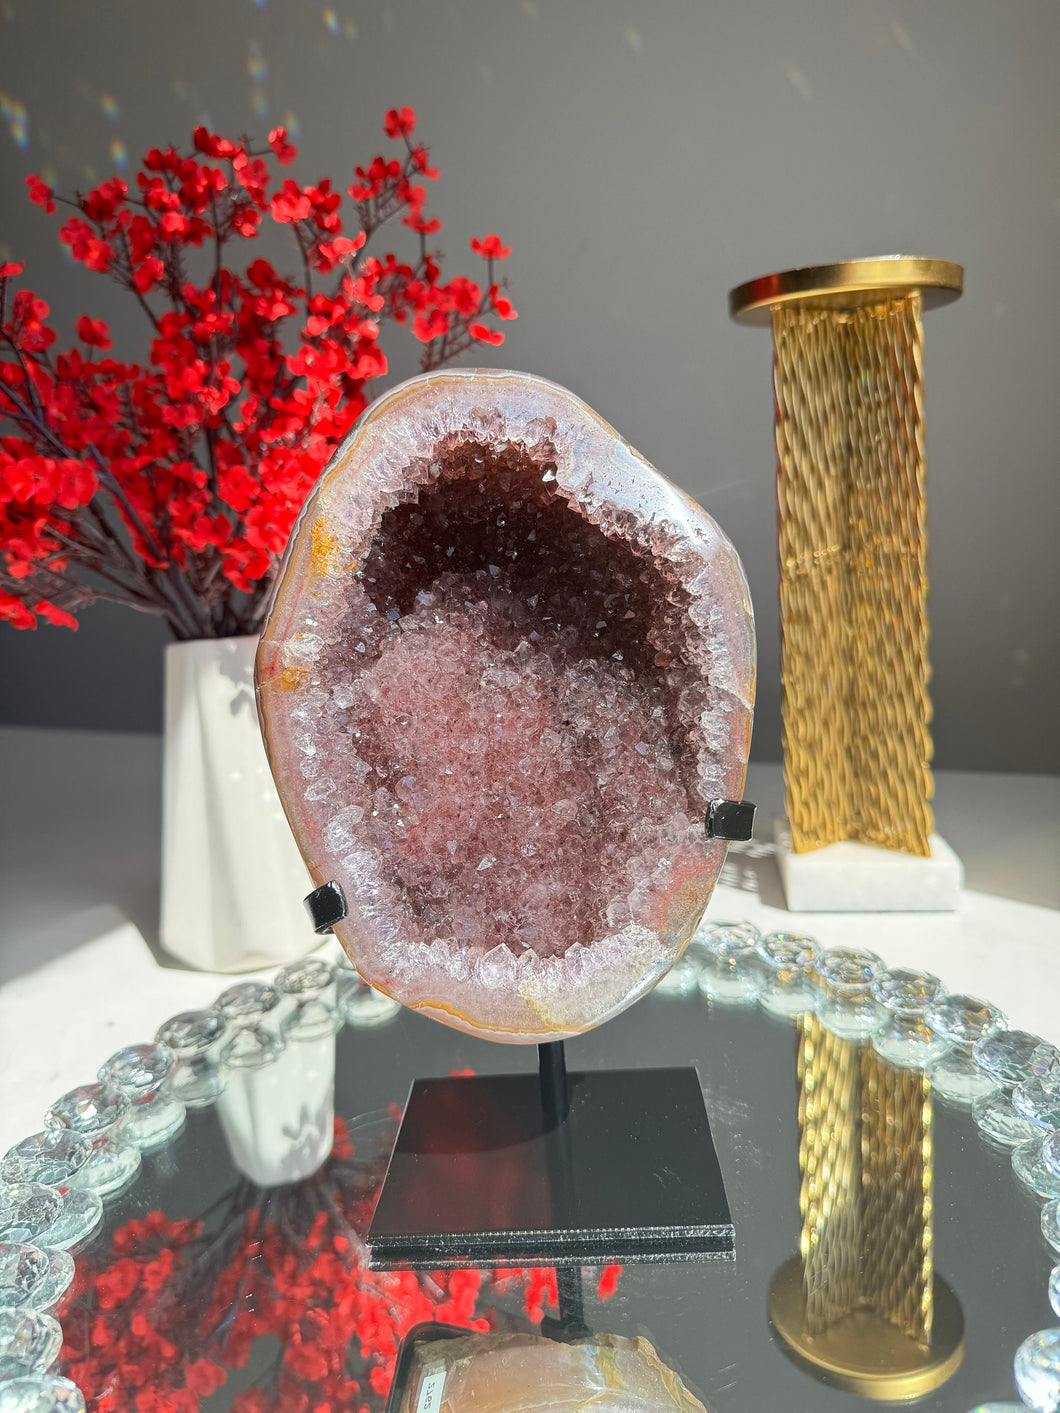 Druzy Amethyst and agate geode  Healing crystals 2762